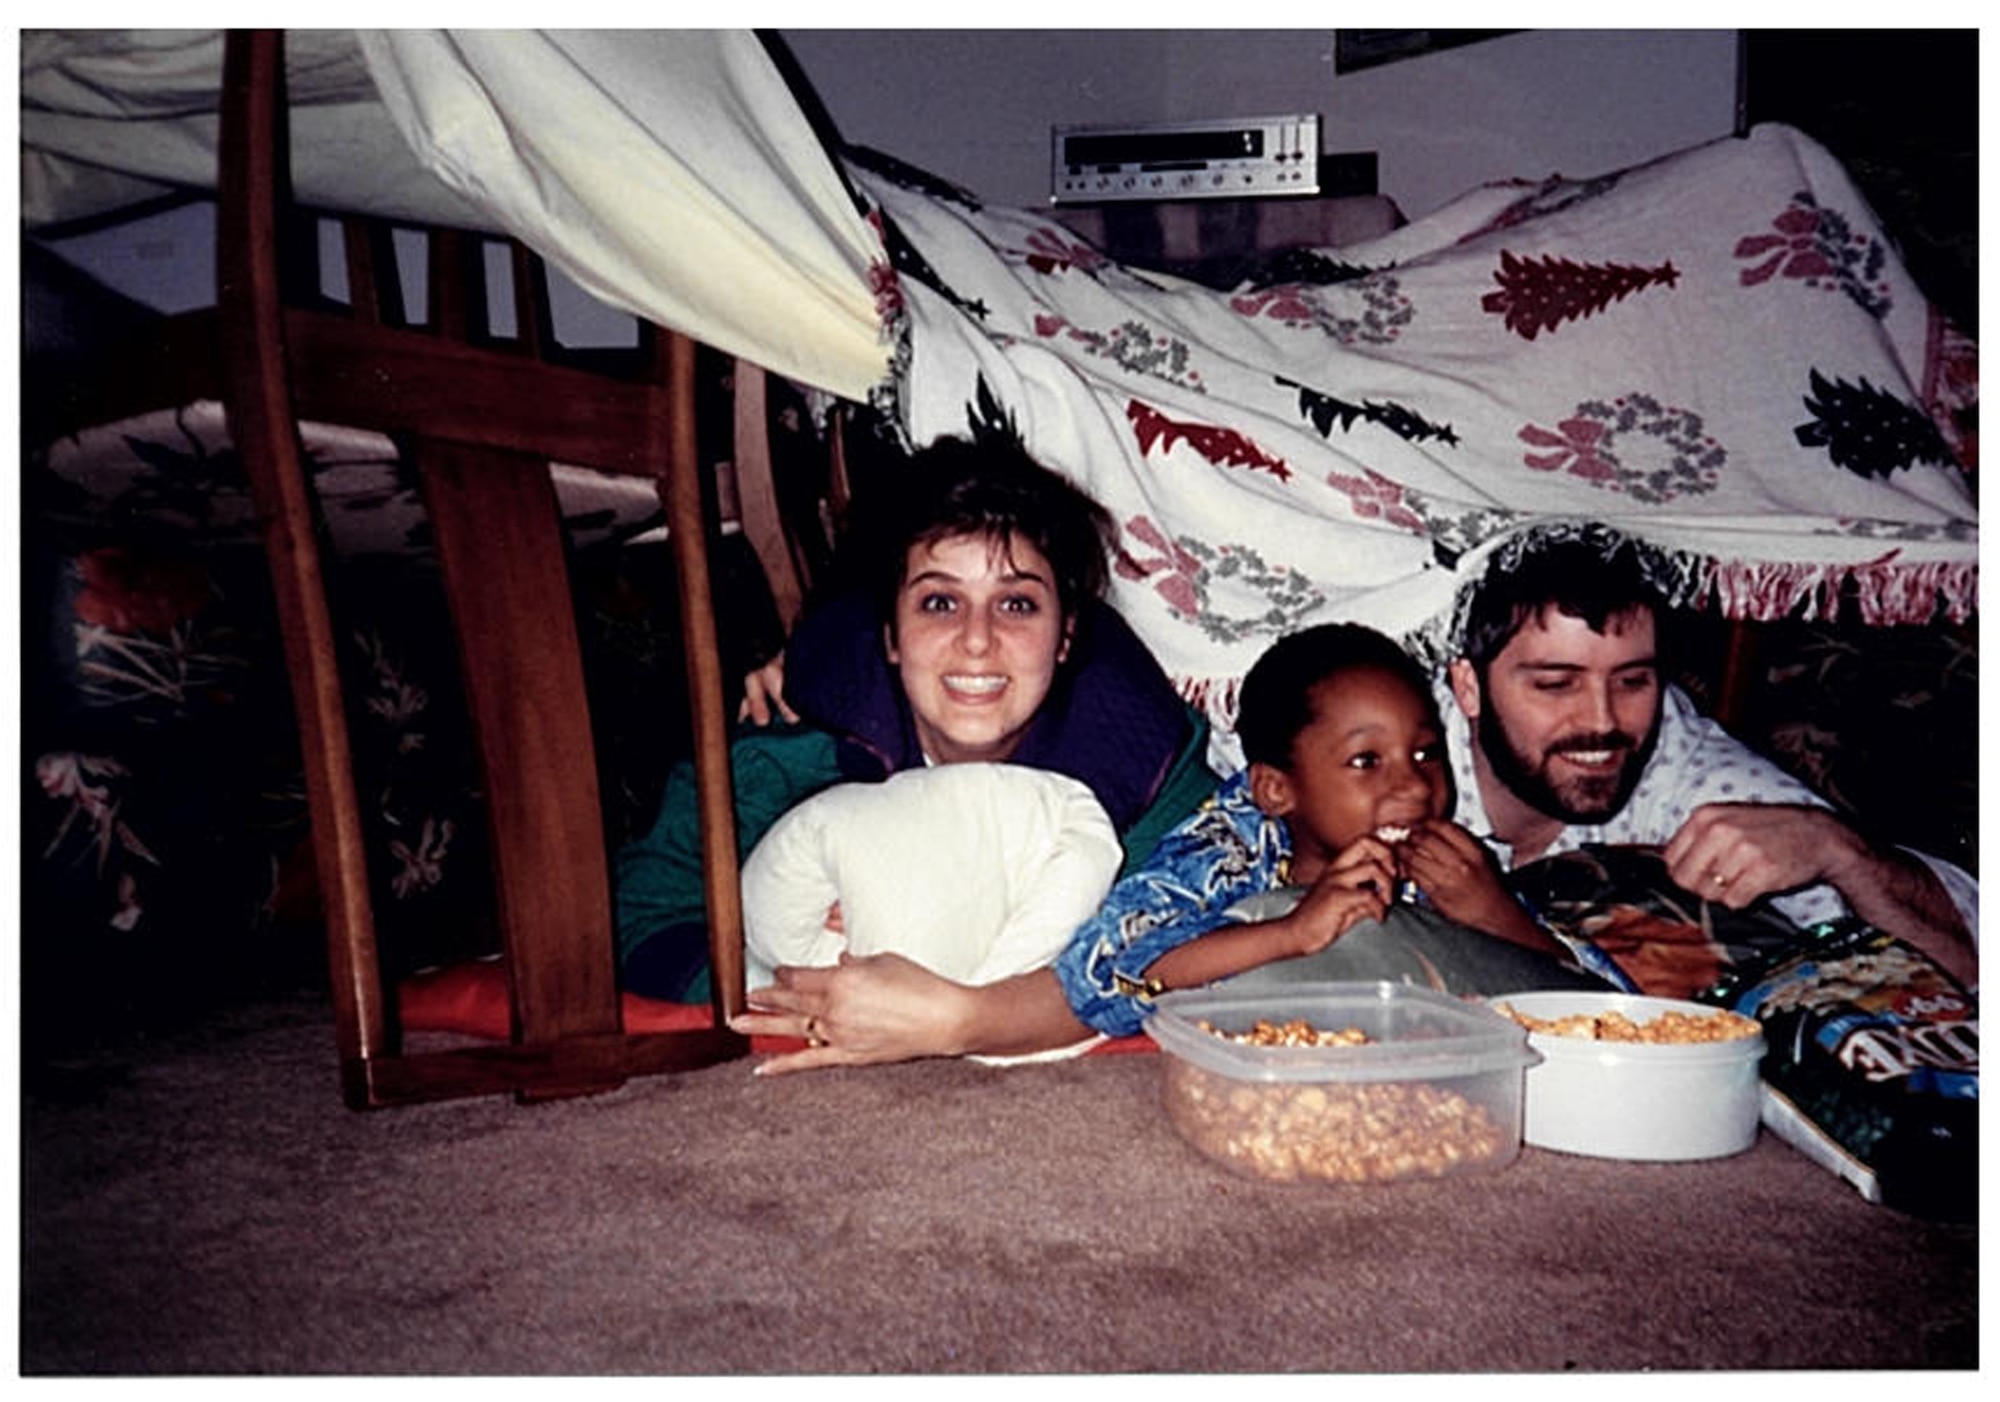 Yvonne Meeder, Christopher Bowyer-Meeder and Bruce Meeder, enjoy popcorn under a home-built blanket fort while watching a movie. Bruce and Yvonne became Chris's legal guardians when he was just five-years-old. (U.S. Air Force courtesy photo)